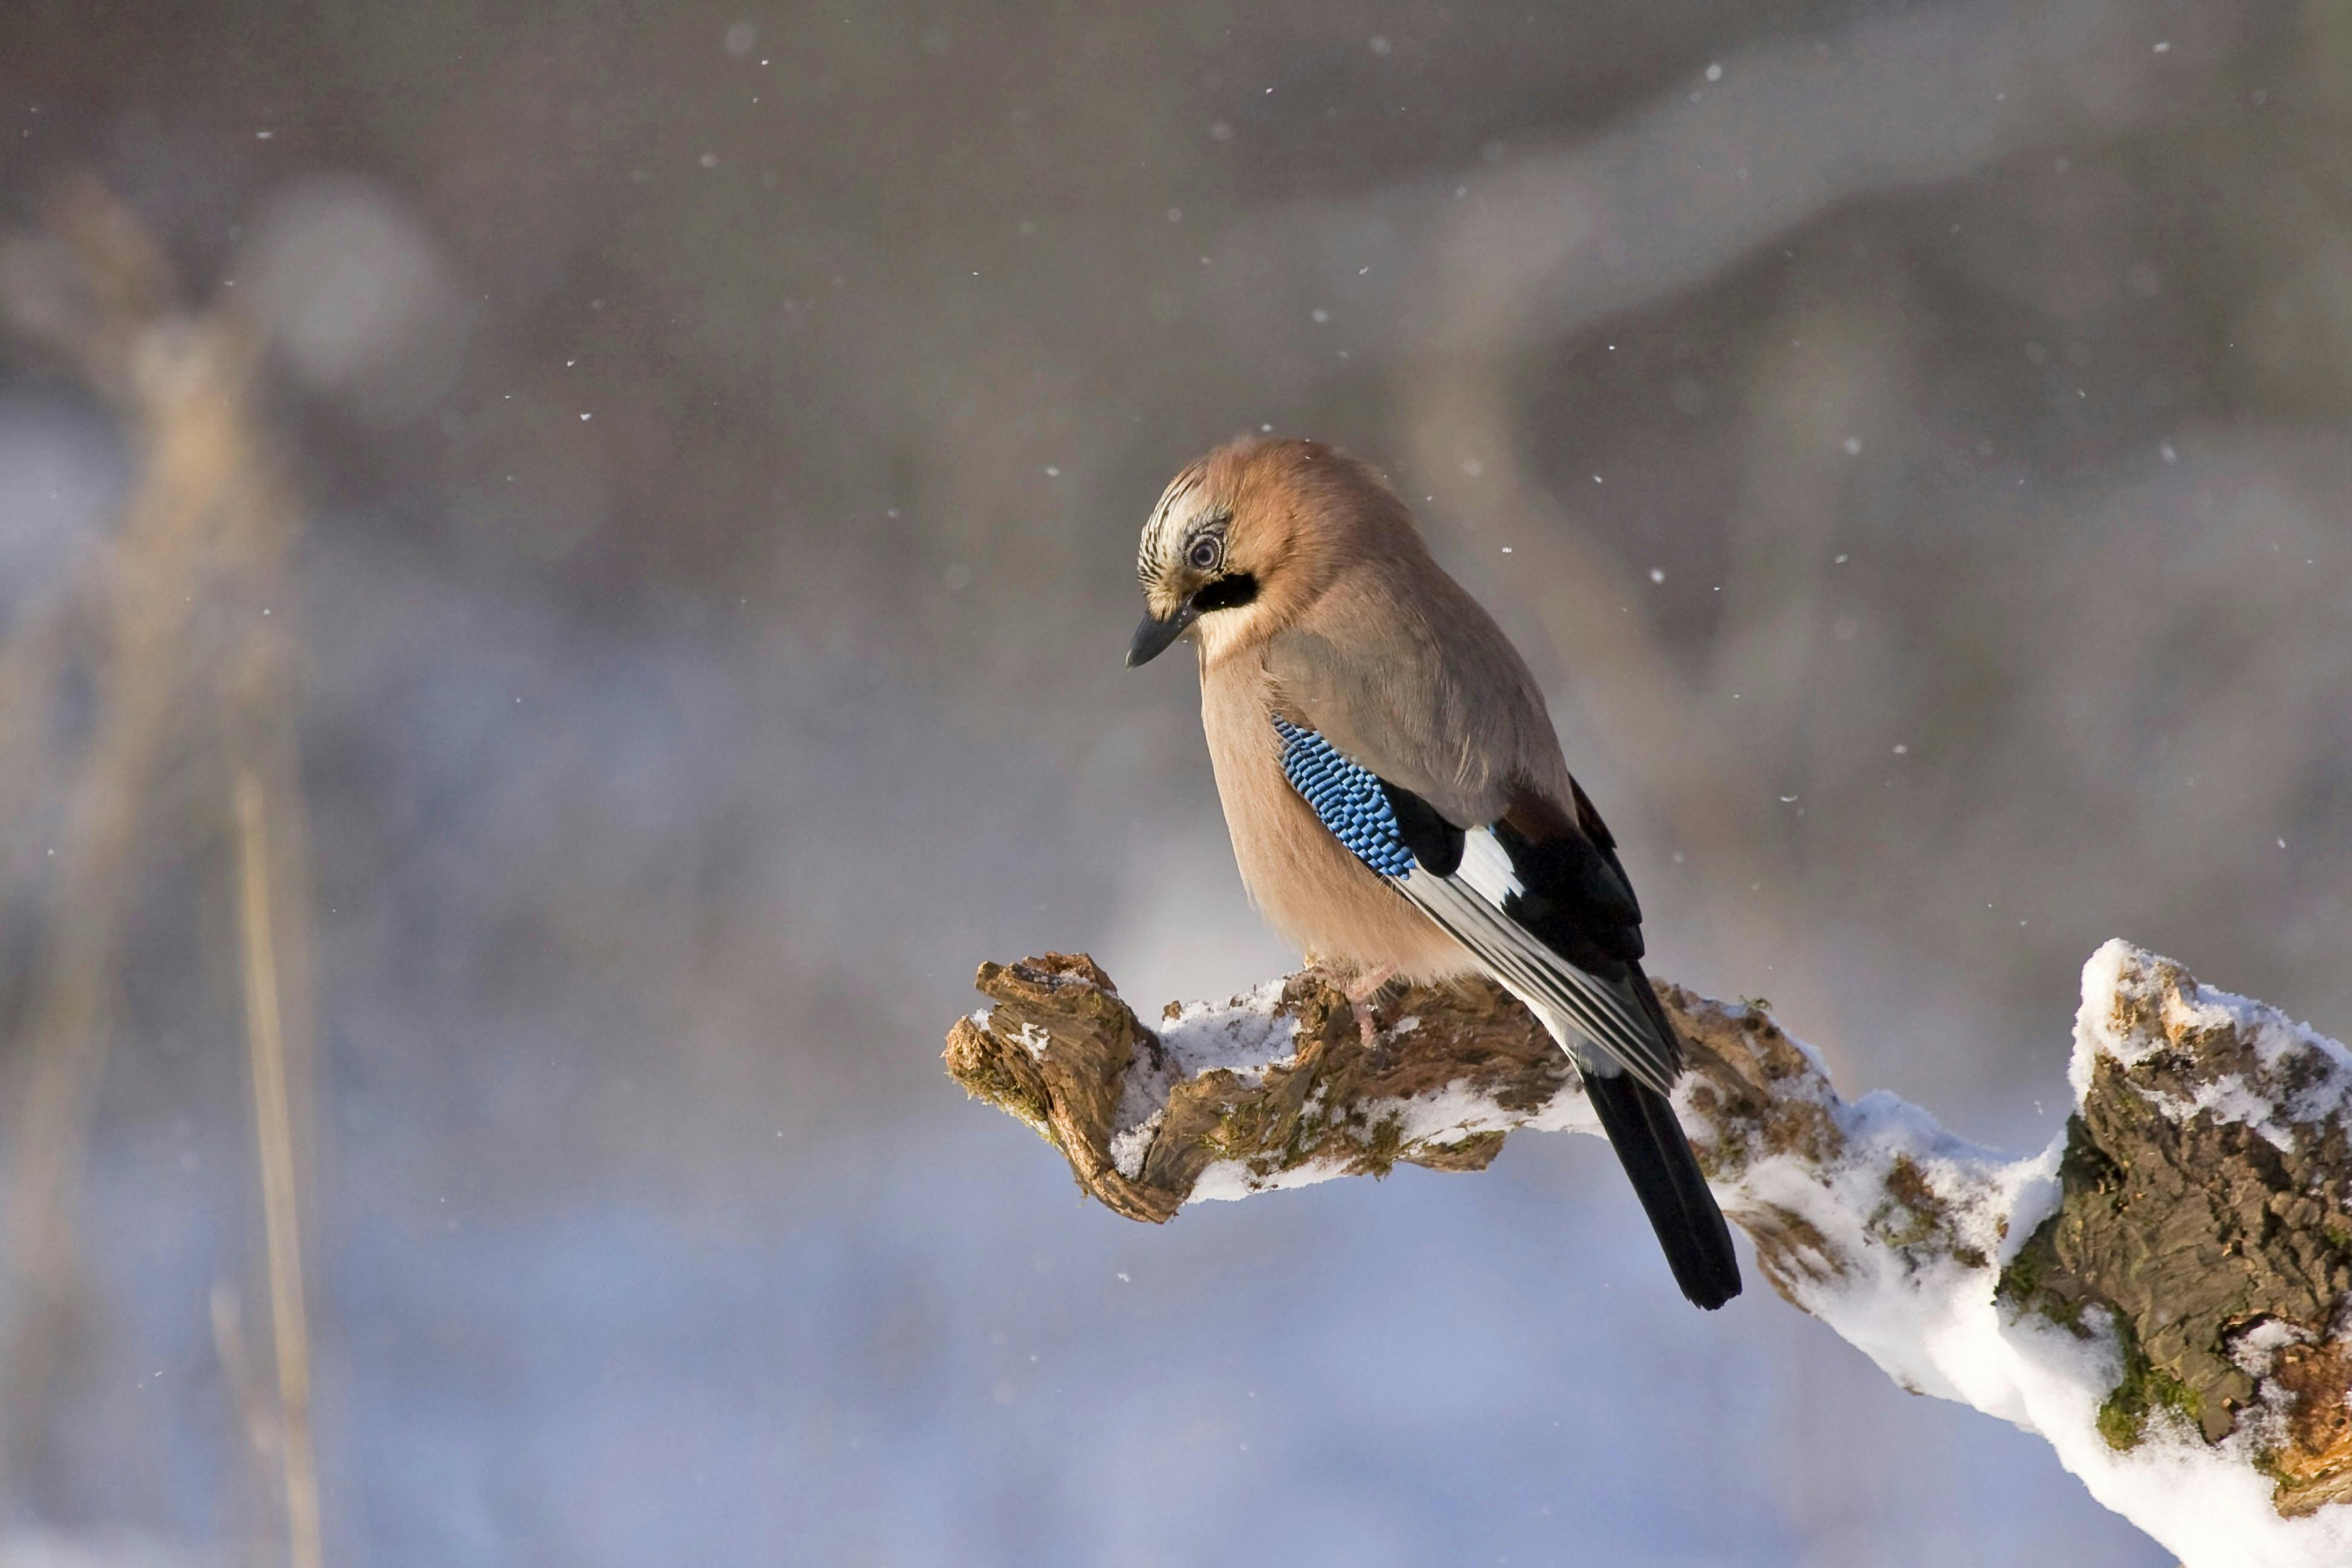 Spiritual Significance of Seeing a Blue Bird